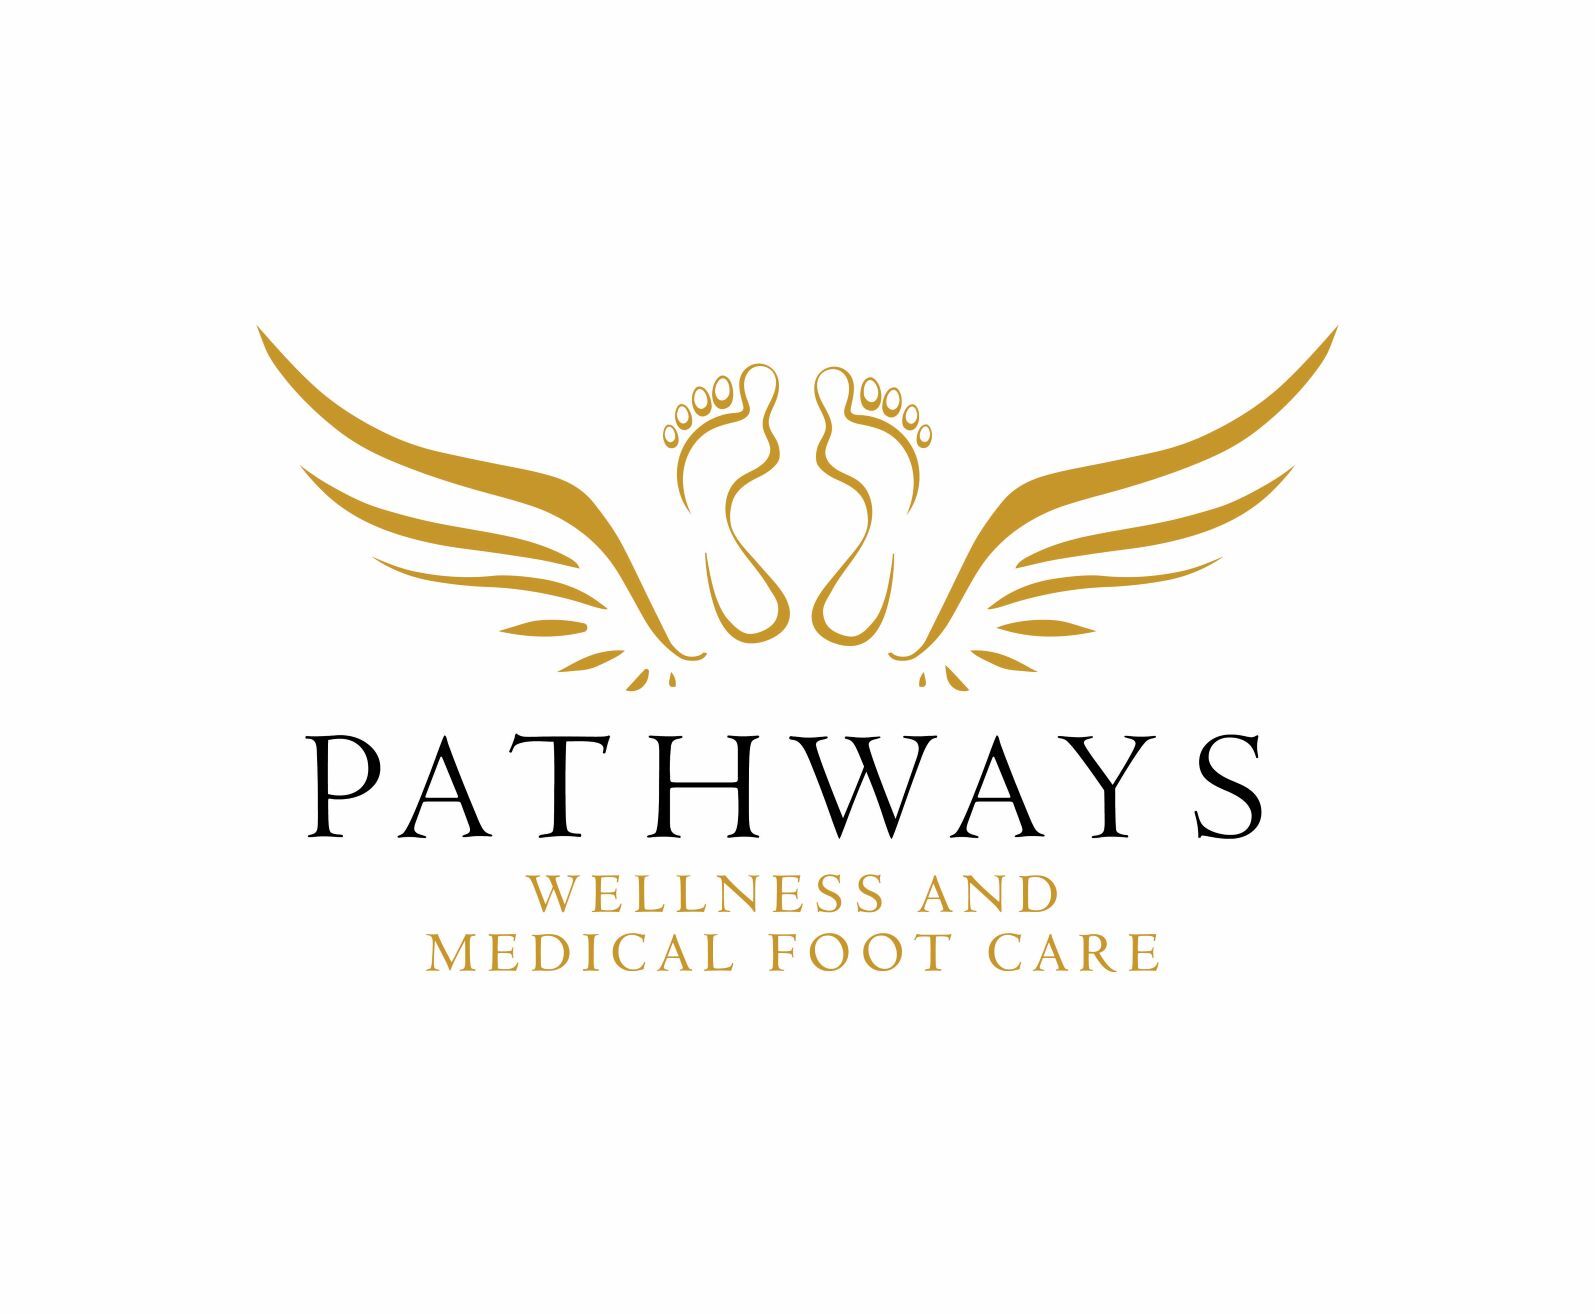 Pathways - Wellness and Medical Foot Care